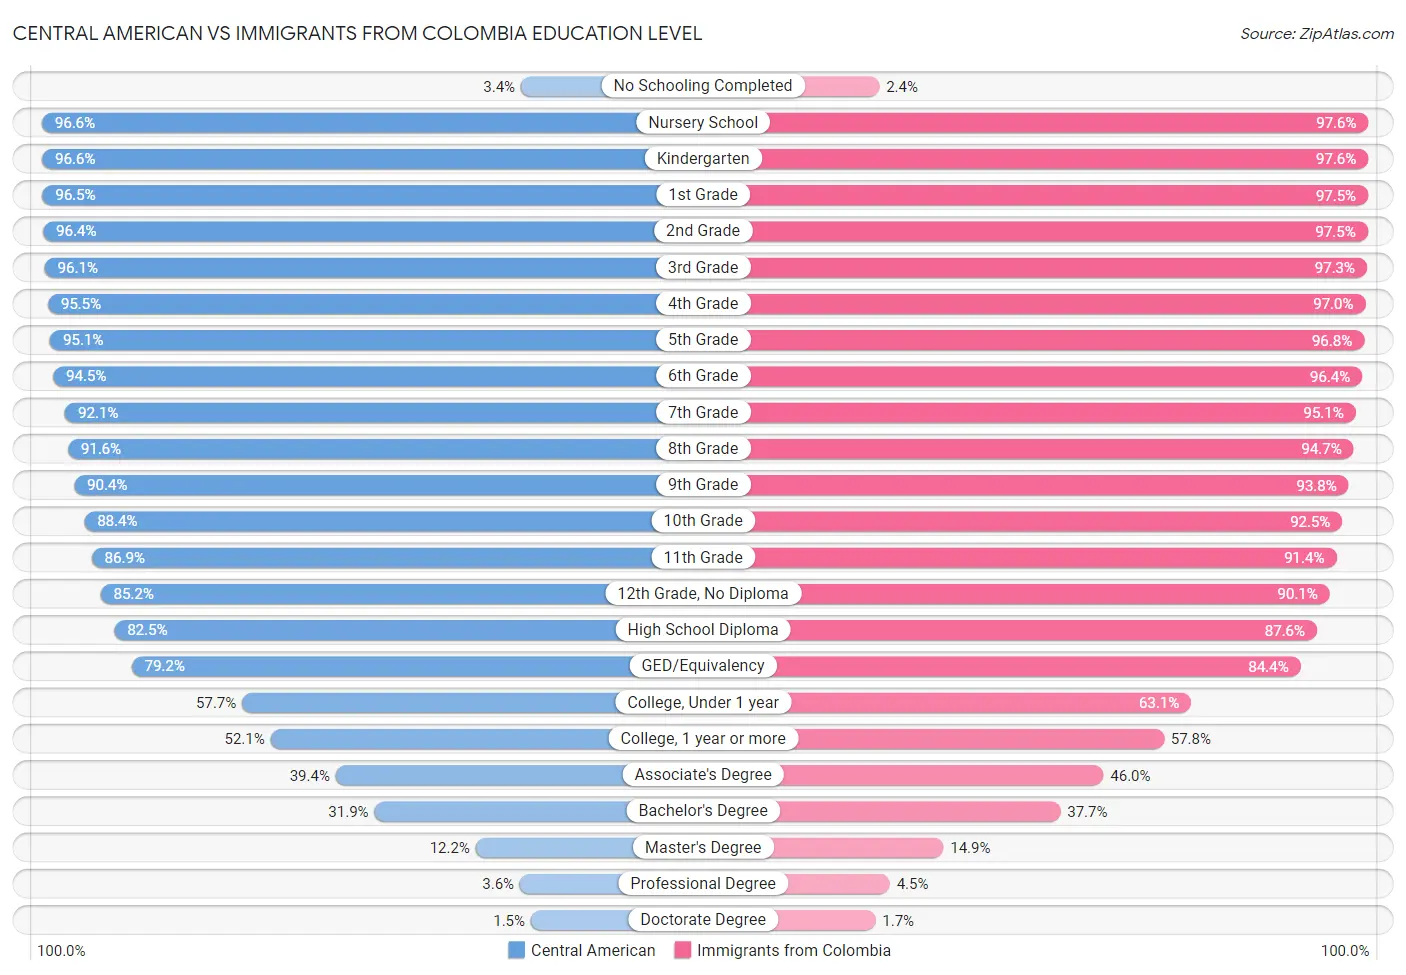 Central American vs Immigrants from Colombia Education Level